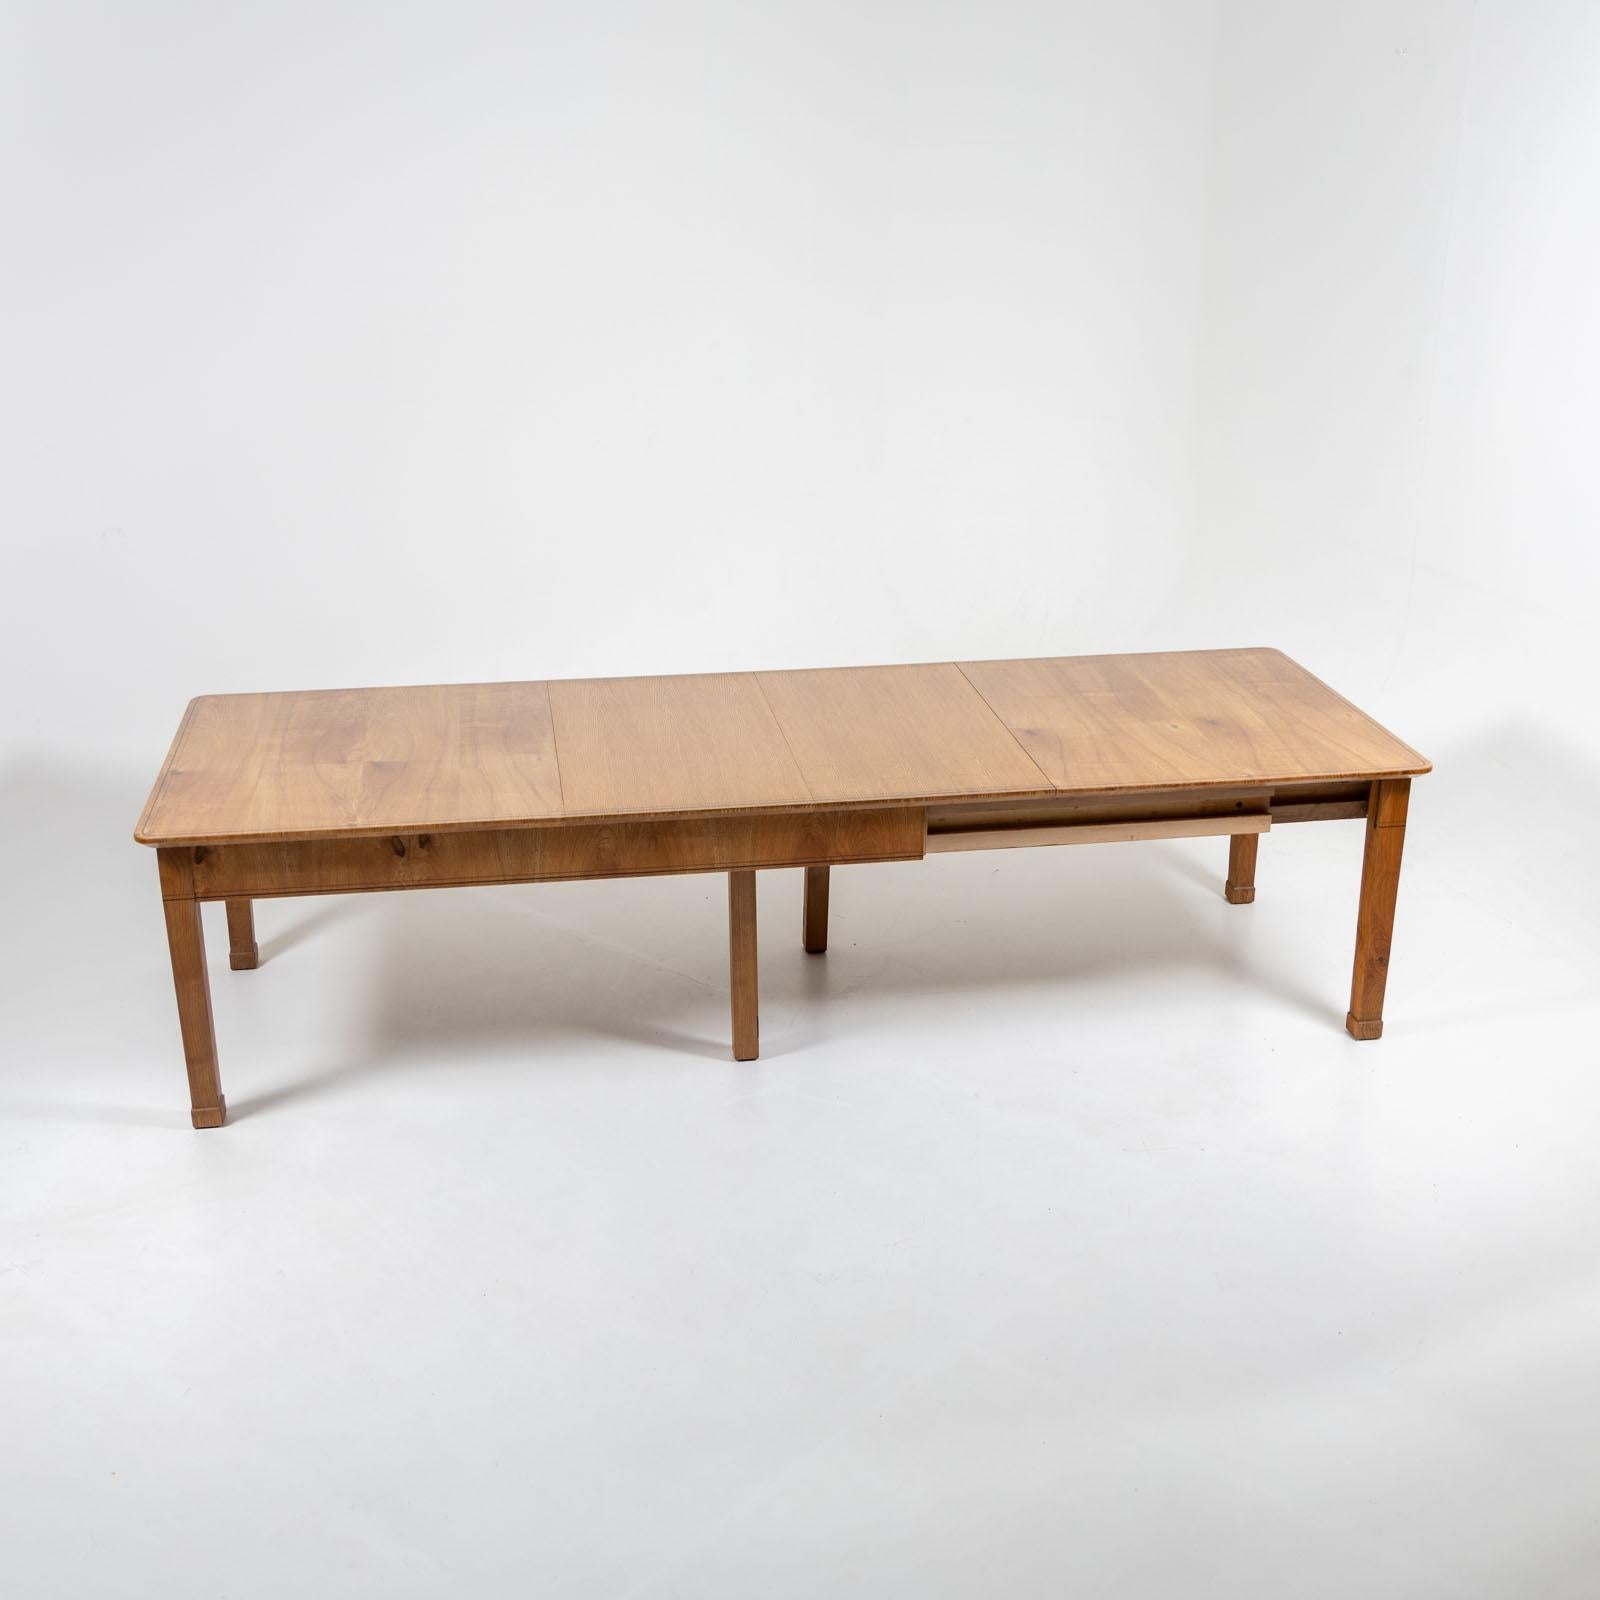 19th Century Large Biedermeier Extension Table in Ash, Germany, circa 1820